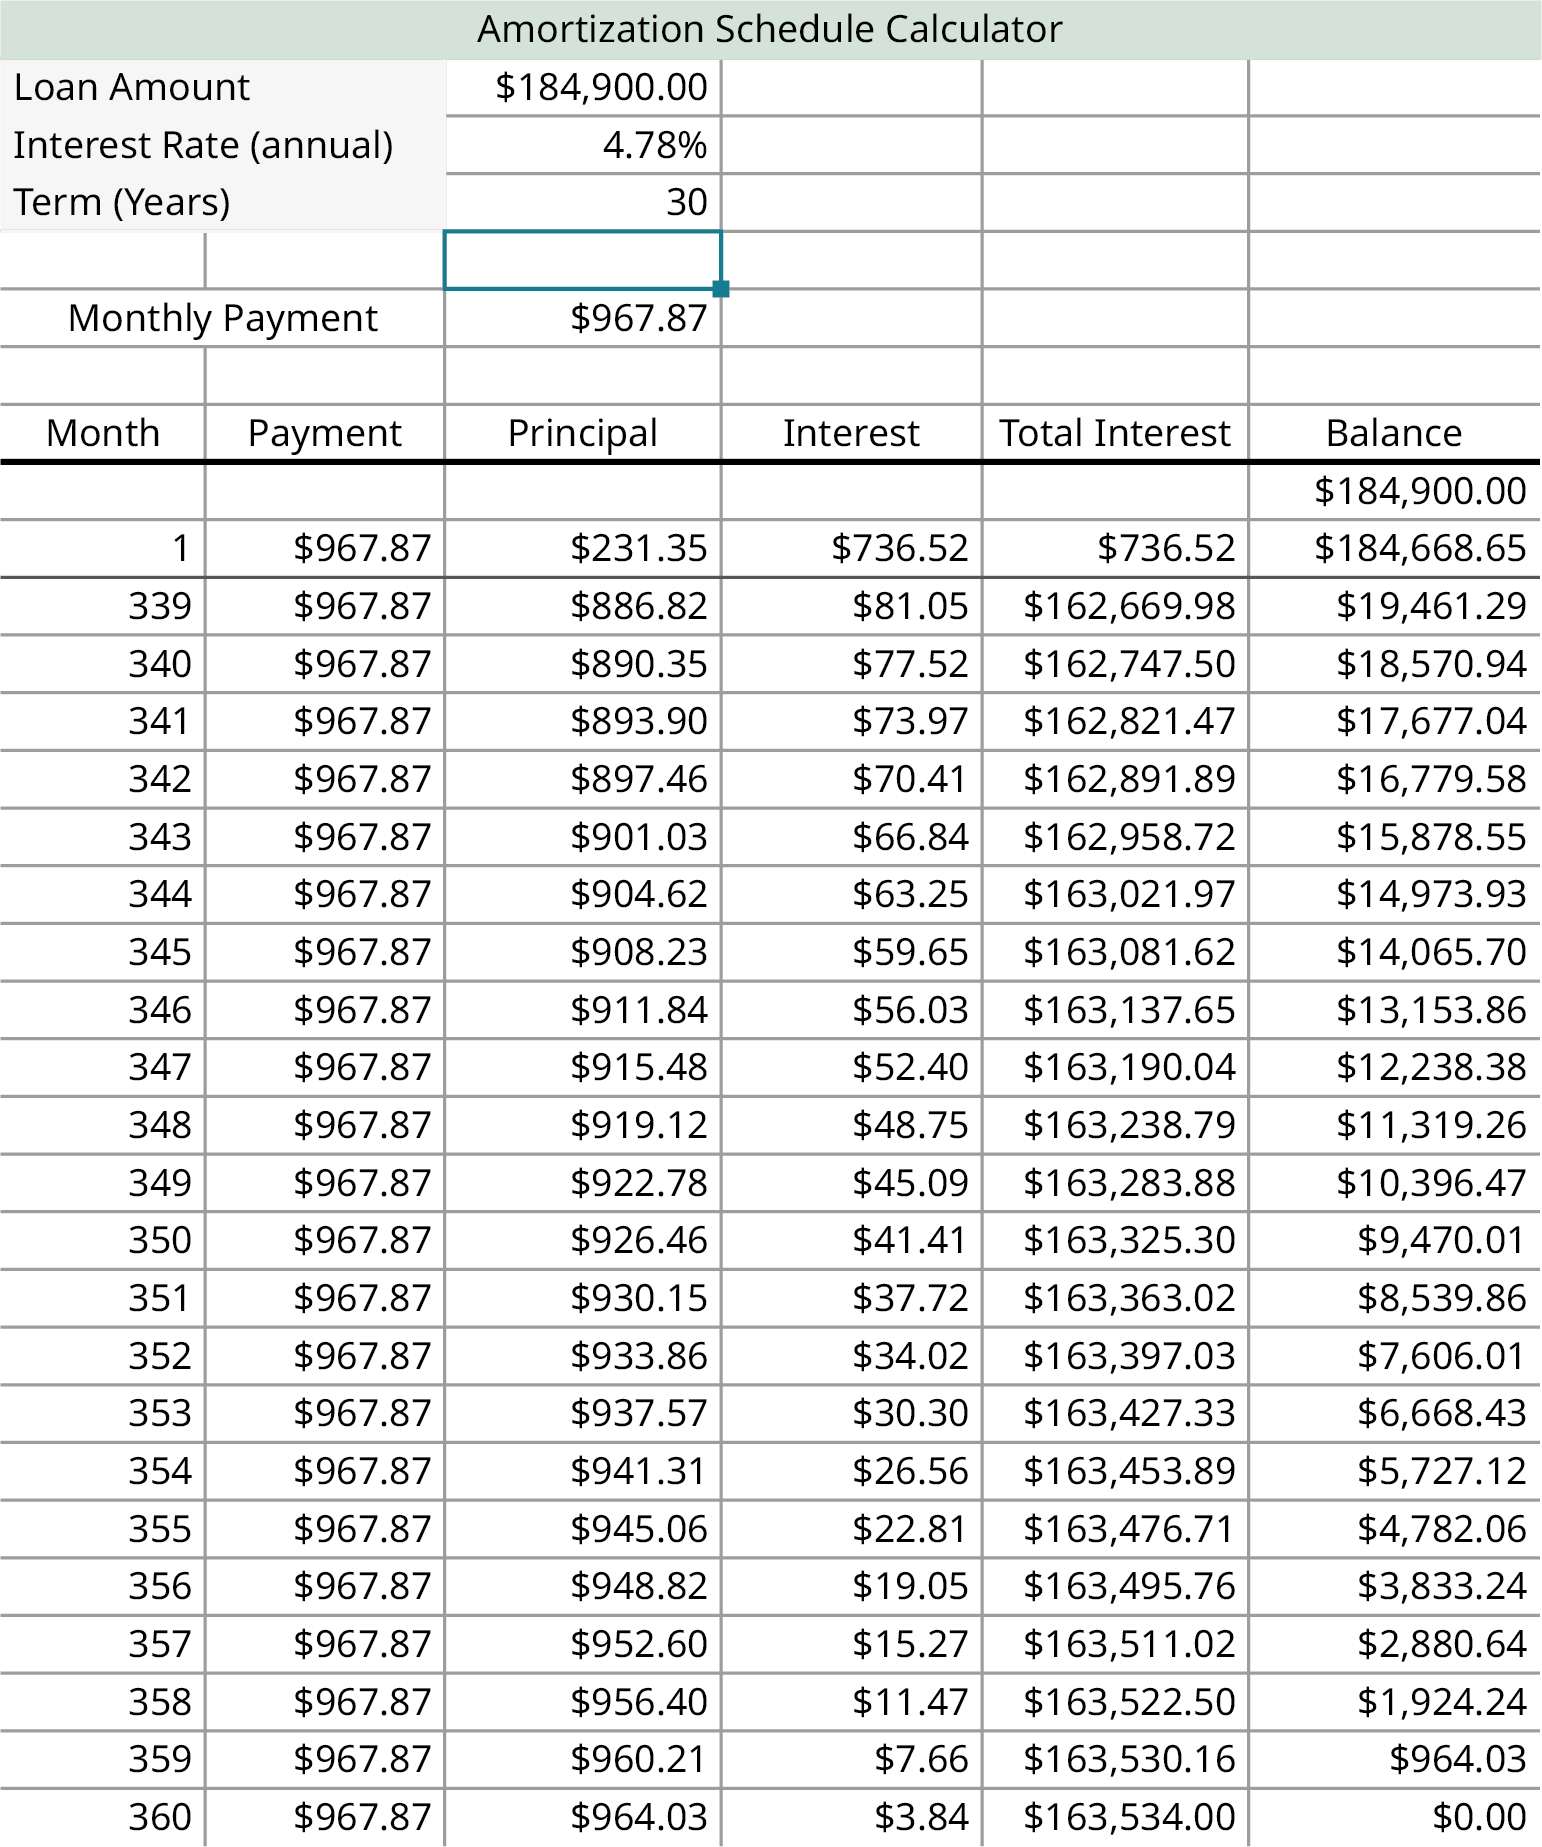 The sheet calculates the repayment for the loan amount of $184,900.00 for an interest rate of 4.78 percent annually and the monthly payment is $967.87. The factors include calculations such as month, payment, principal, interest, total, and interest and balance.